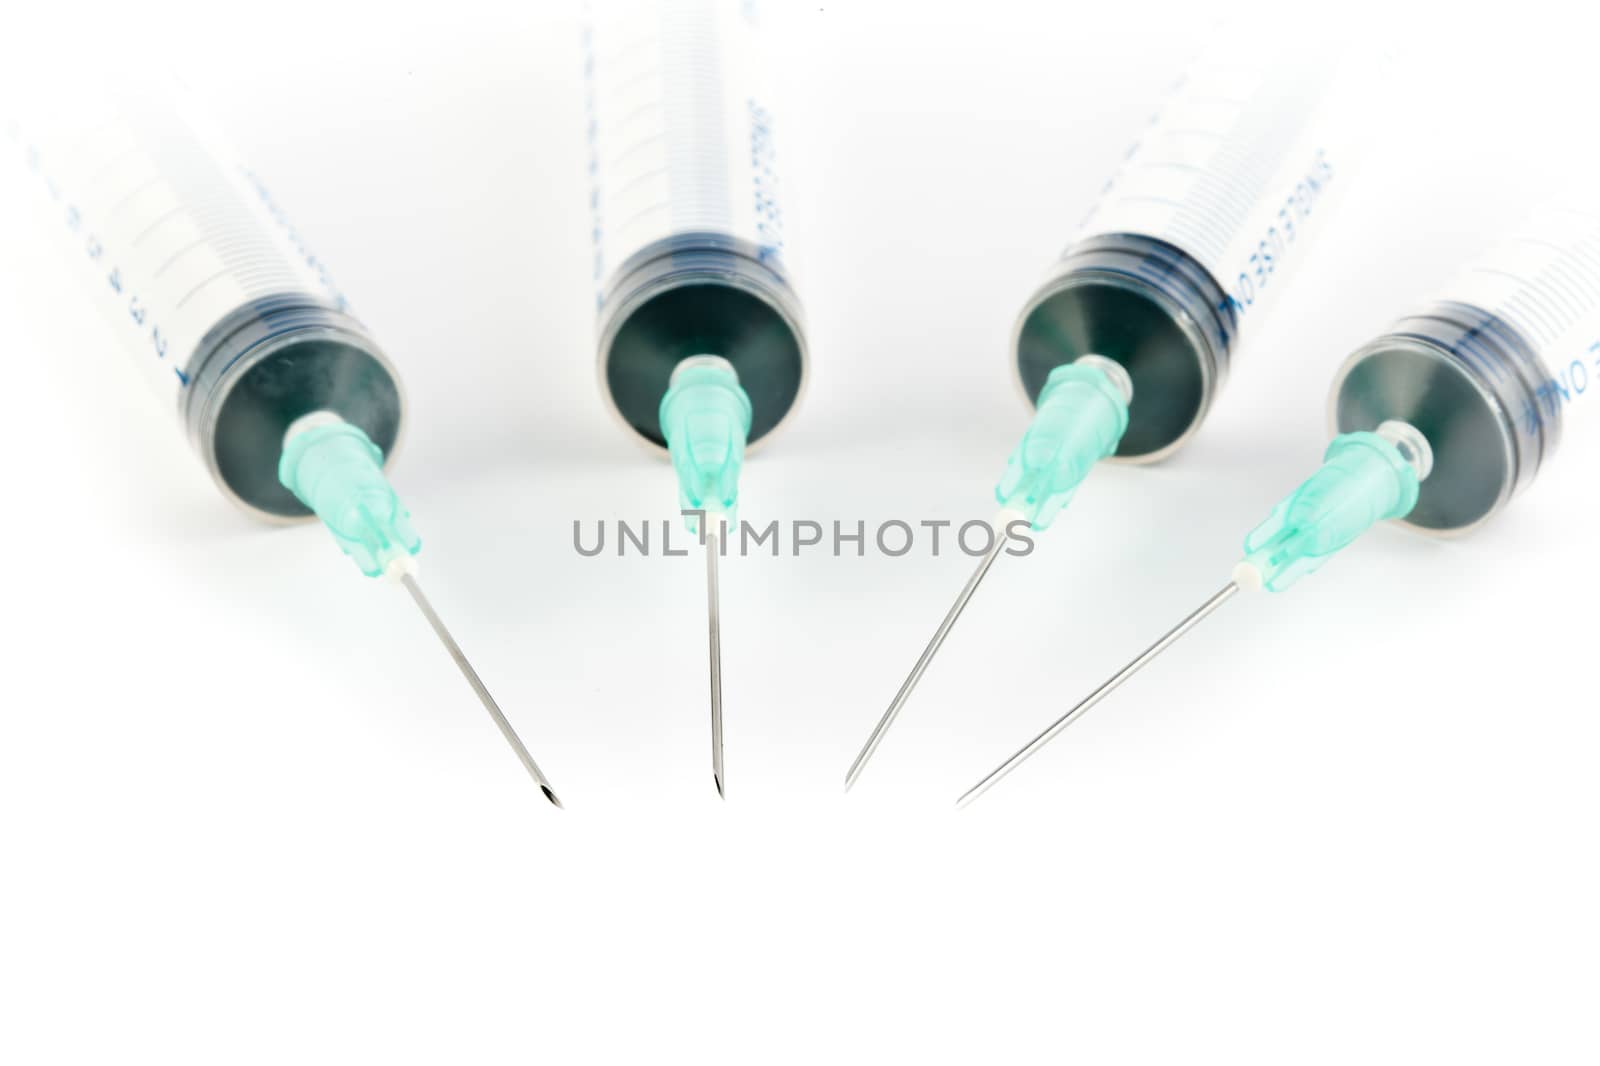 Studio shot of Four Syringe with copy space on bottom